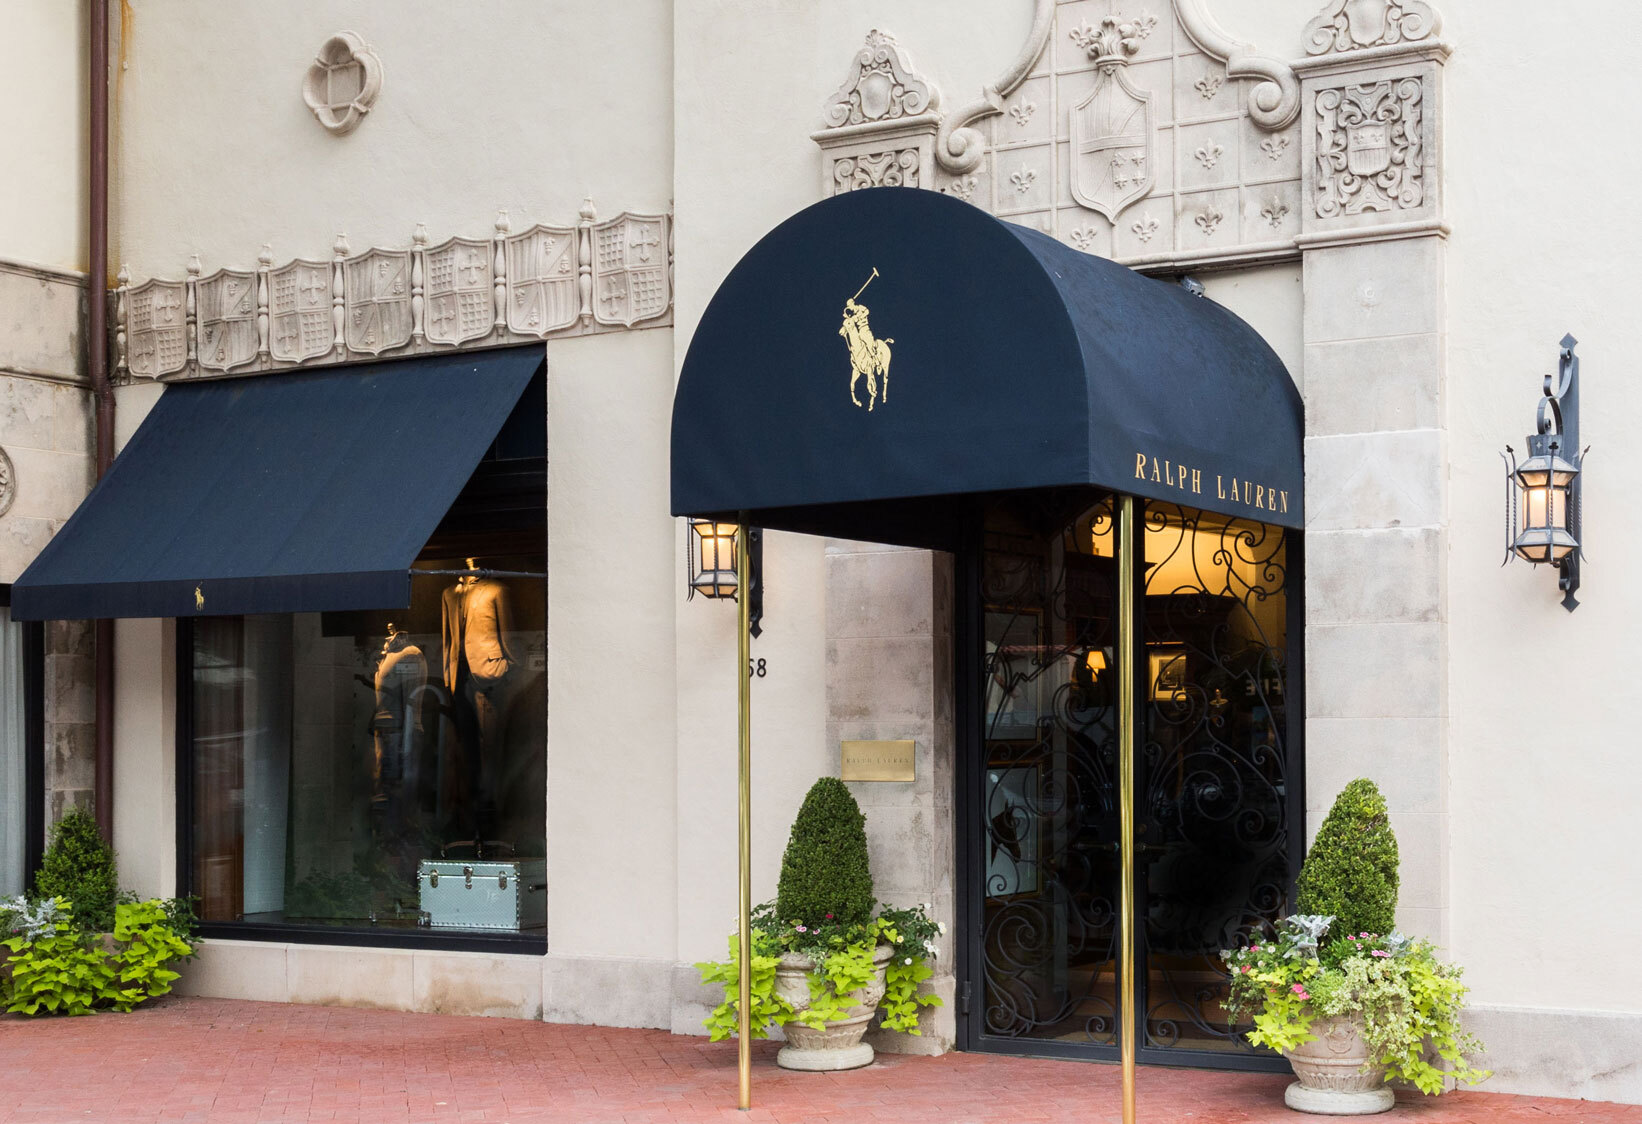 Ralph Lauren moving out of its longtime space at Highland Park Village